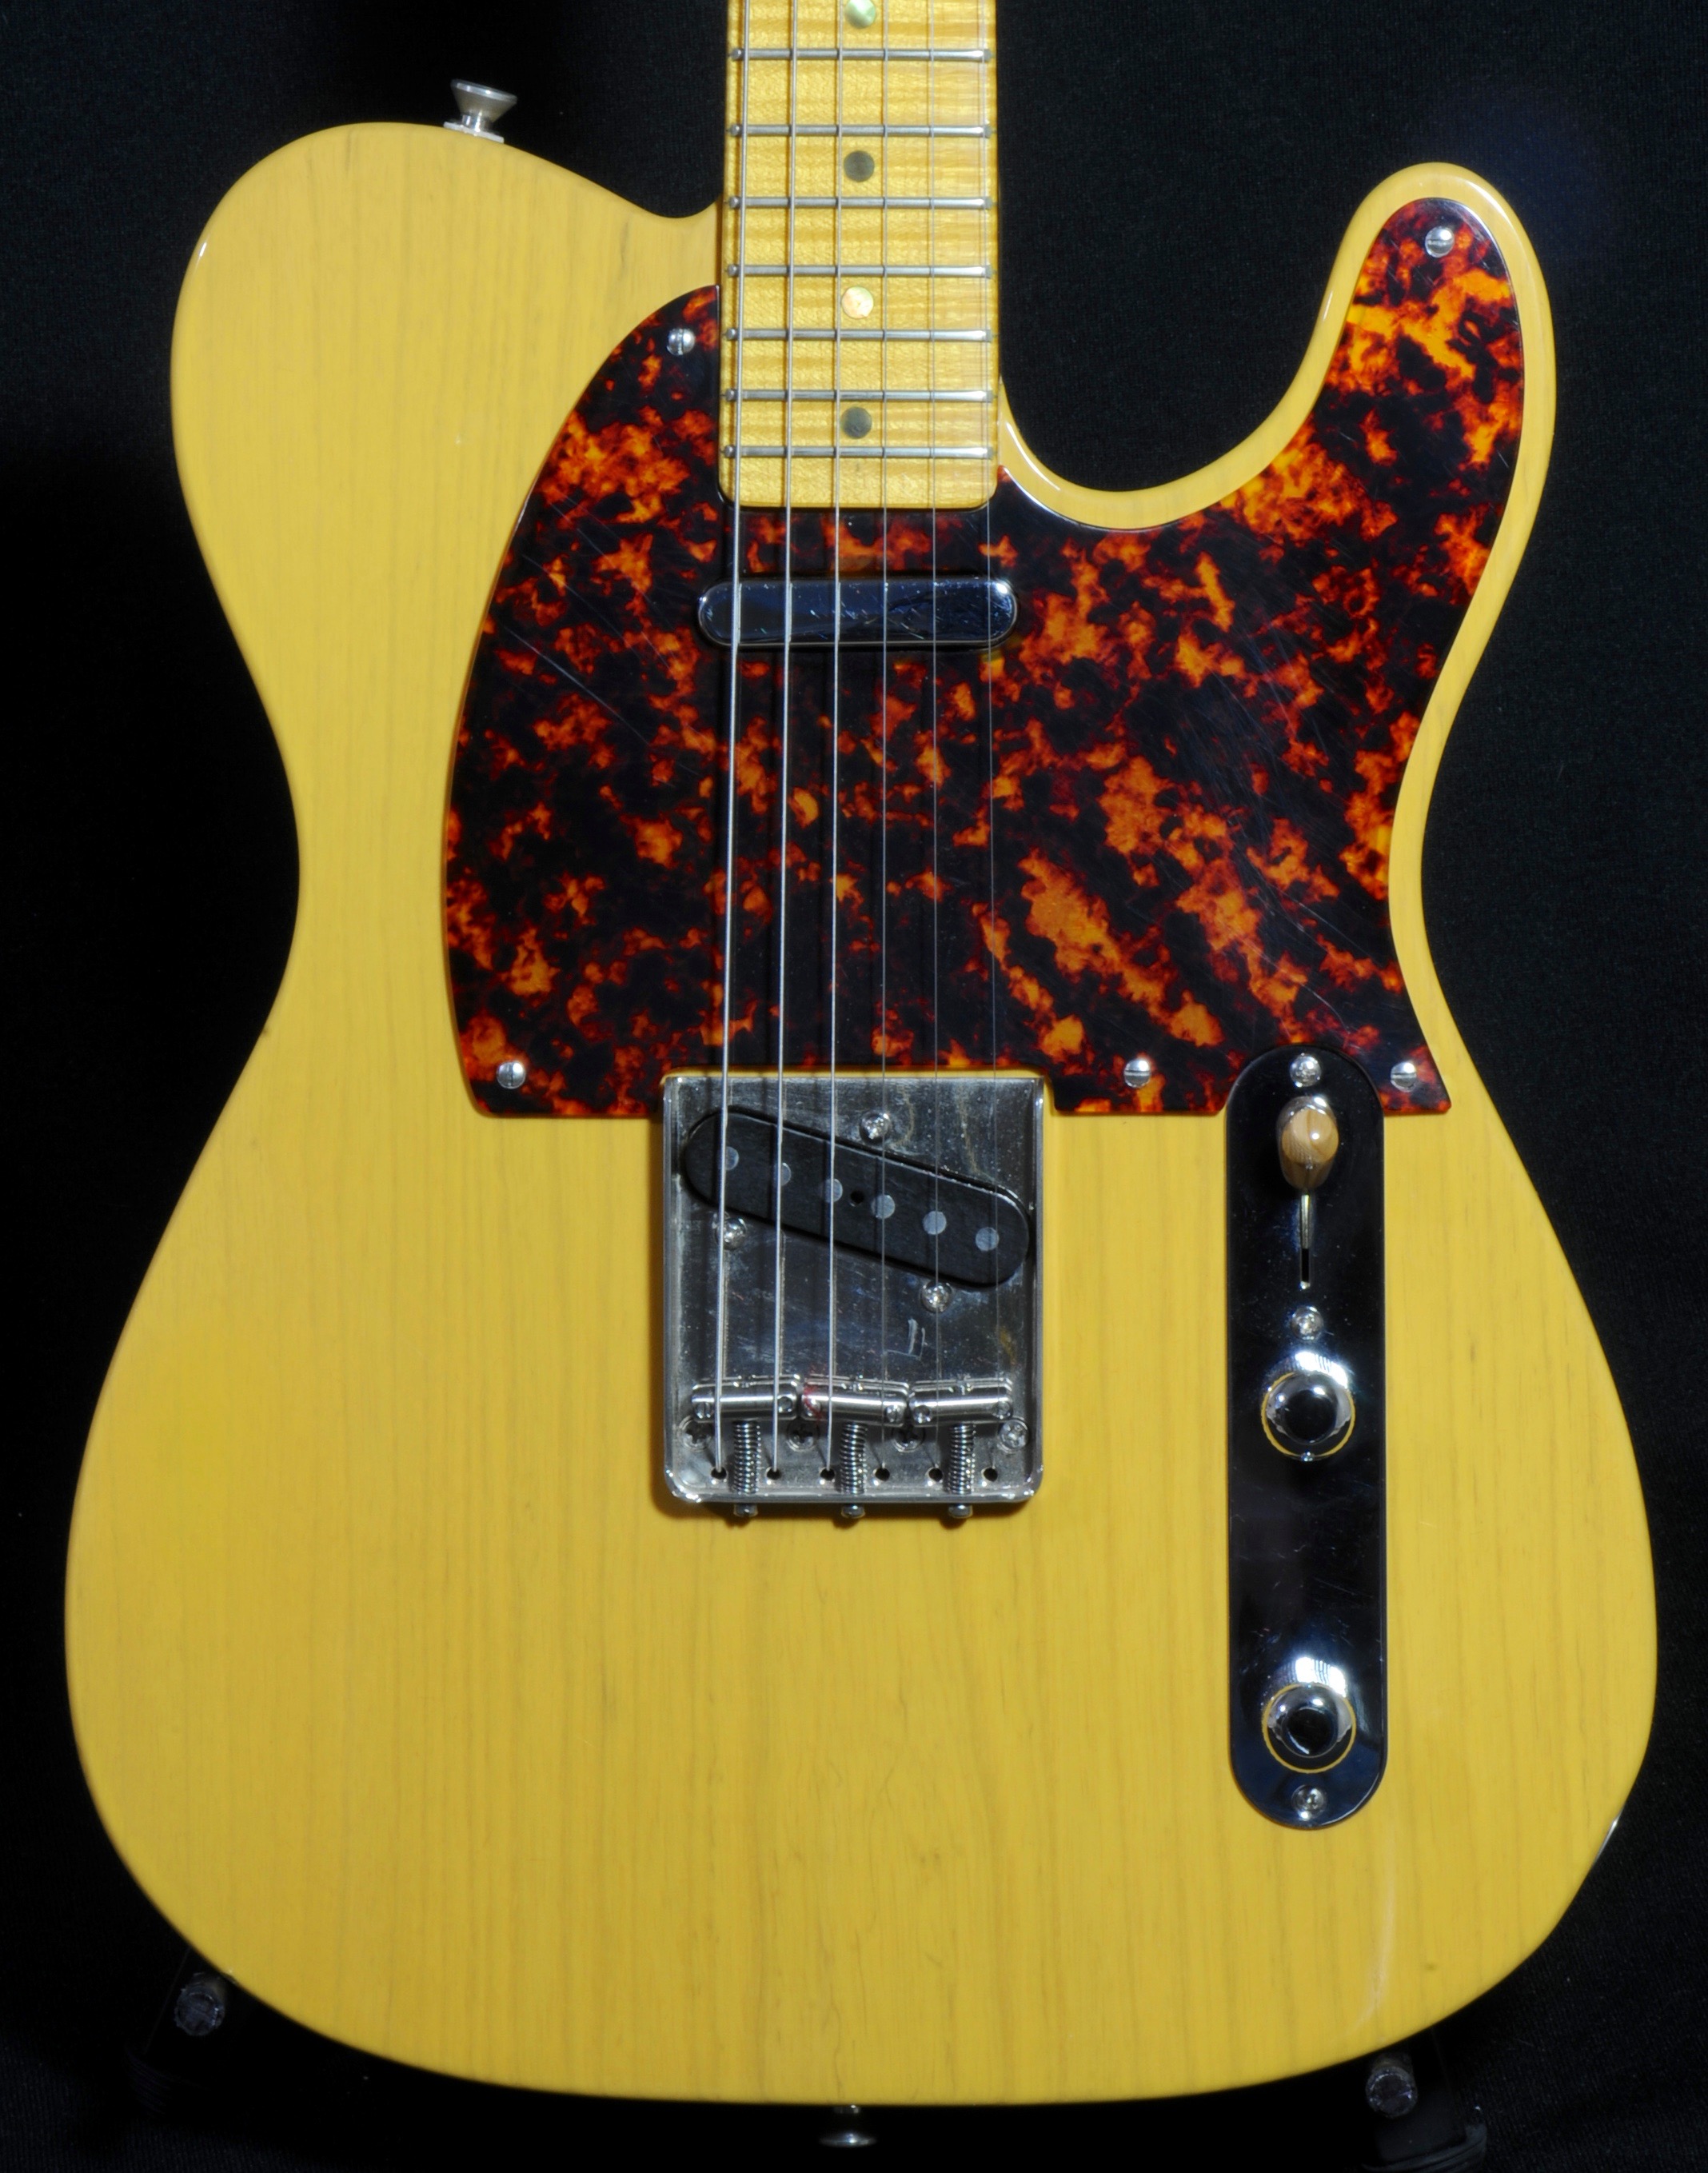 Detemple ’52 Tele :  Hall-of-Fame Tone on THIS Guitar